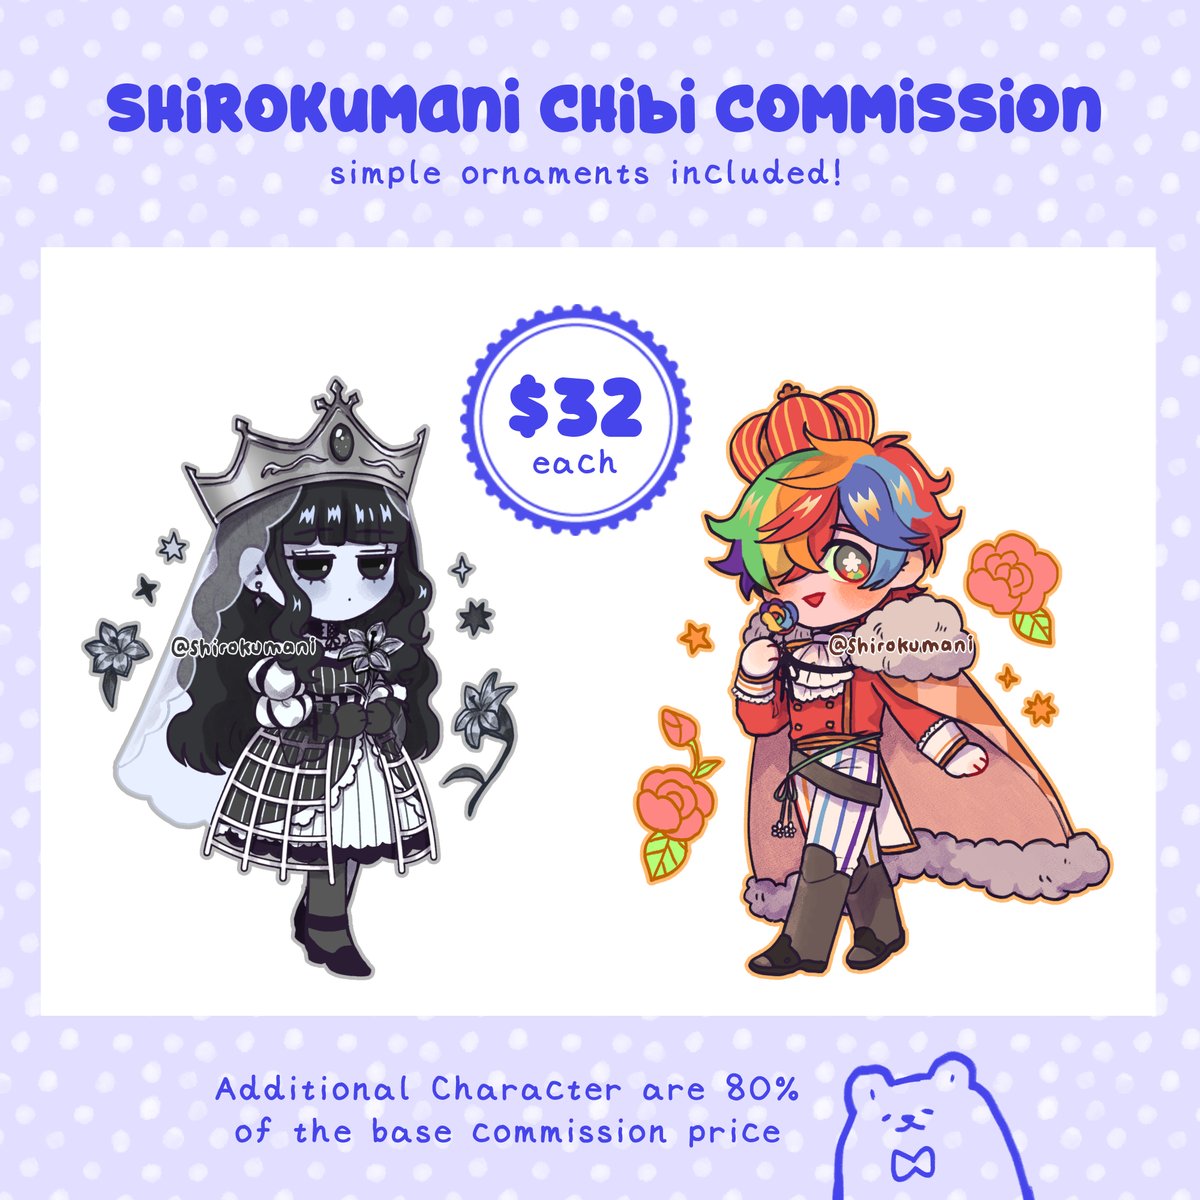 [RT Appreciated] hi guys I'm finally opening commissions again! accepting around 5 slots this time! 

https://t.co/W3QmE6ovOH 